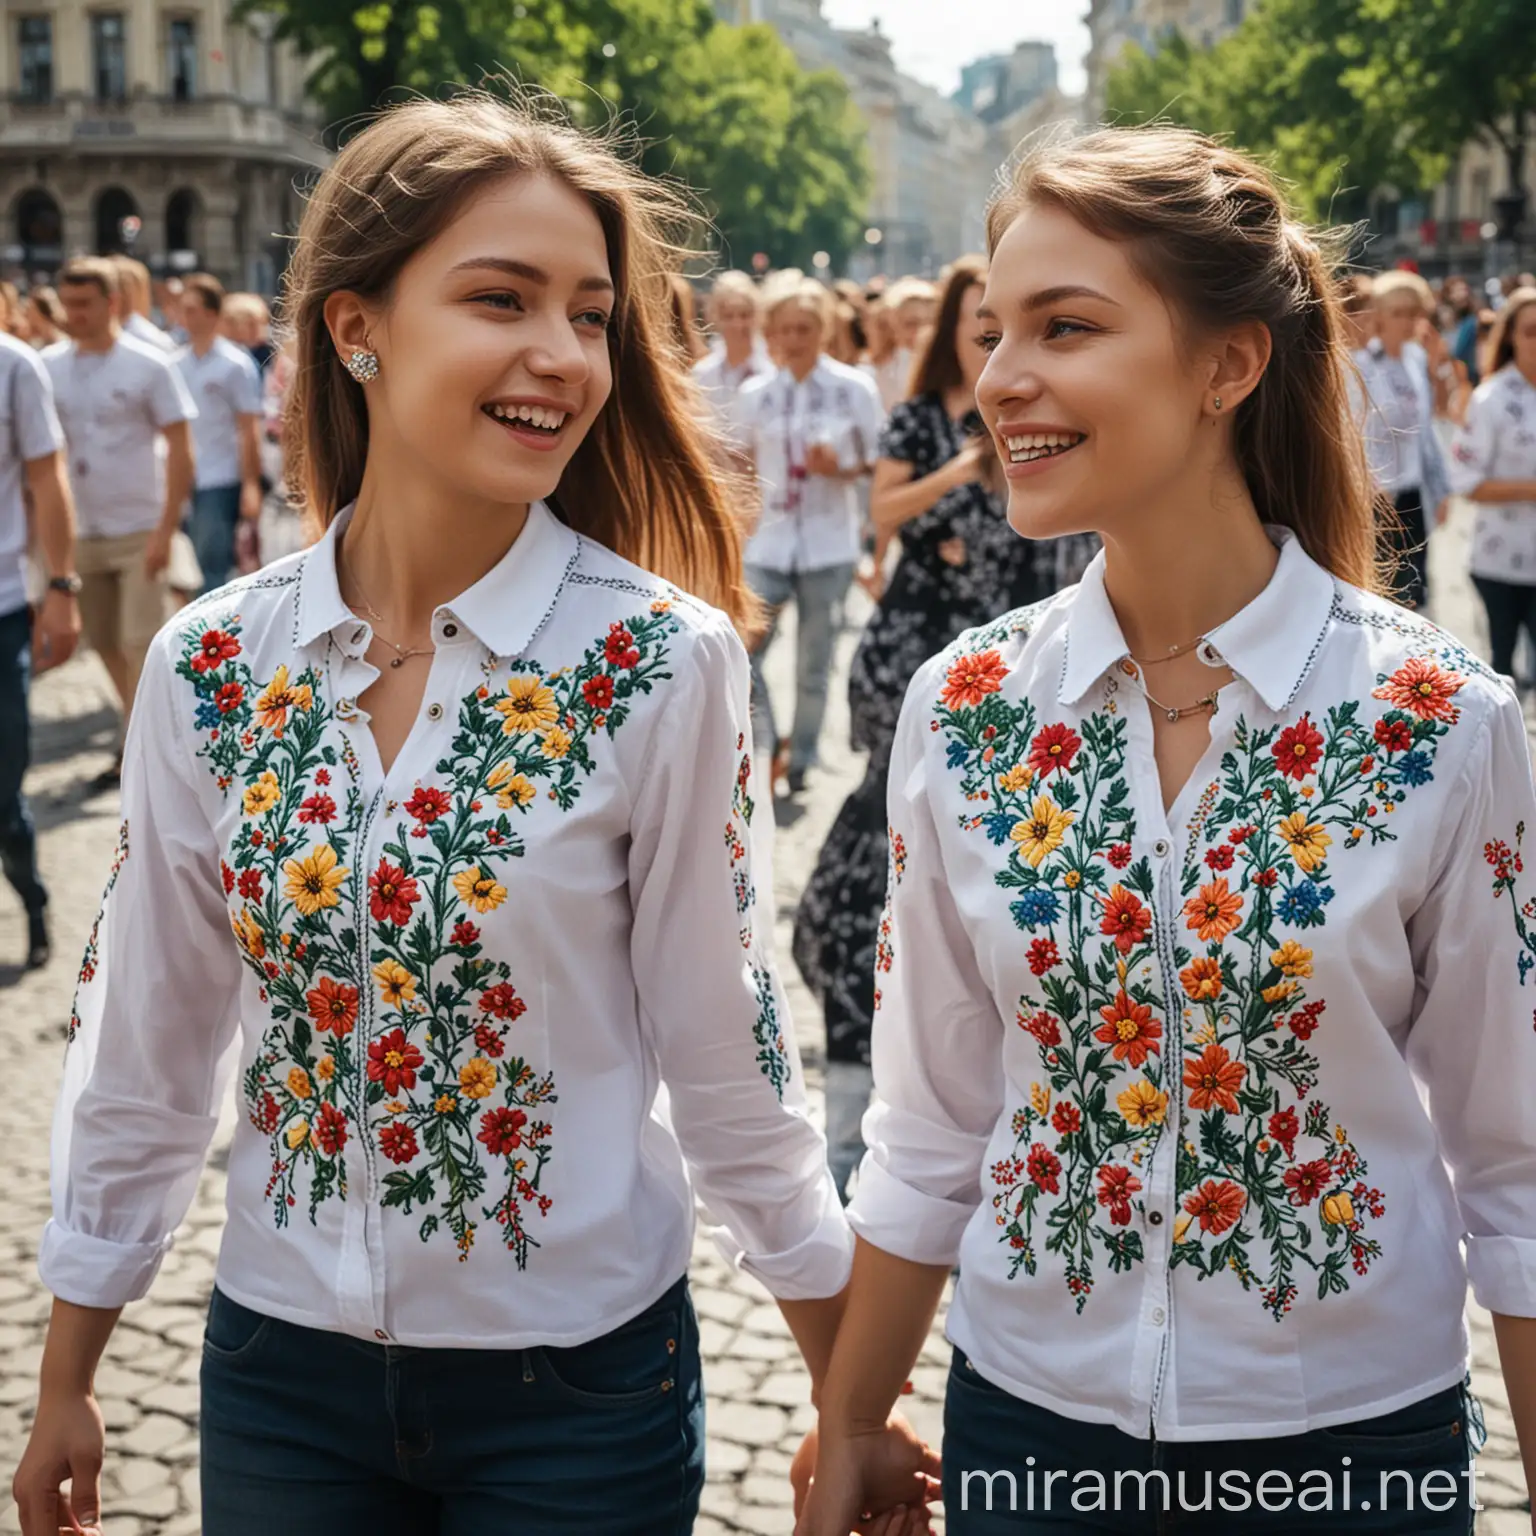 ukrainians in embroidered shirts go happily along Khreshchatyk with flowers